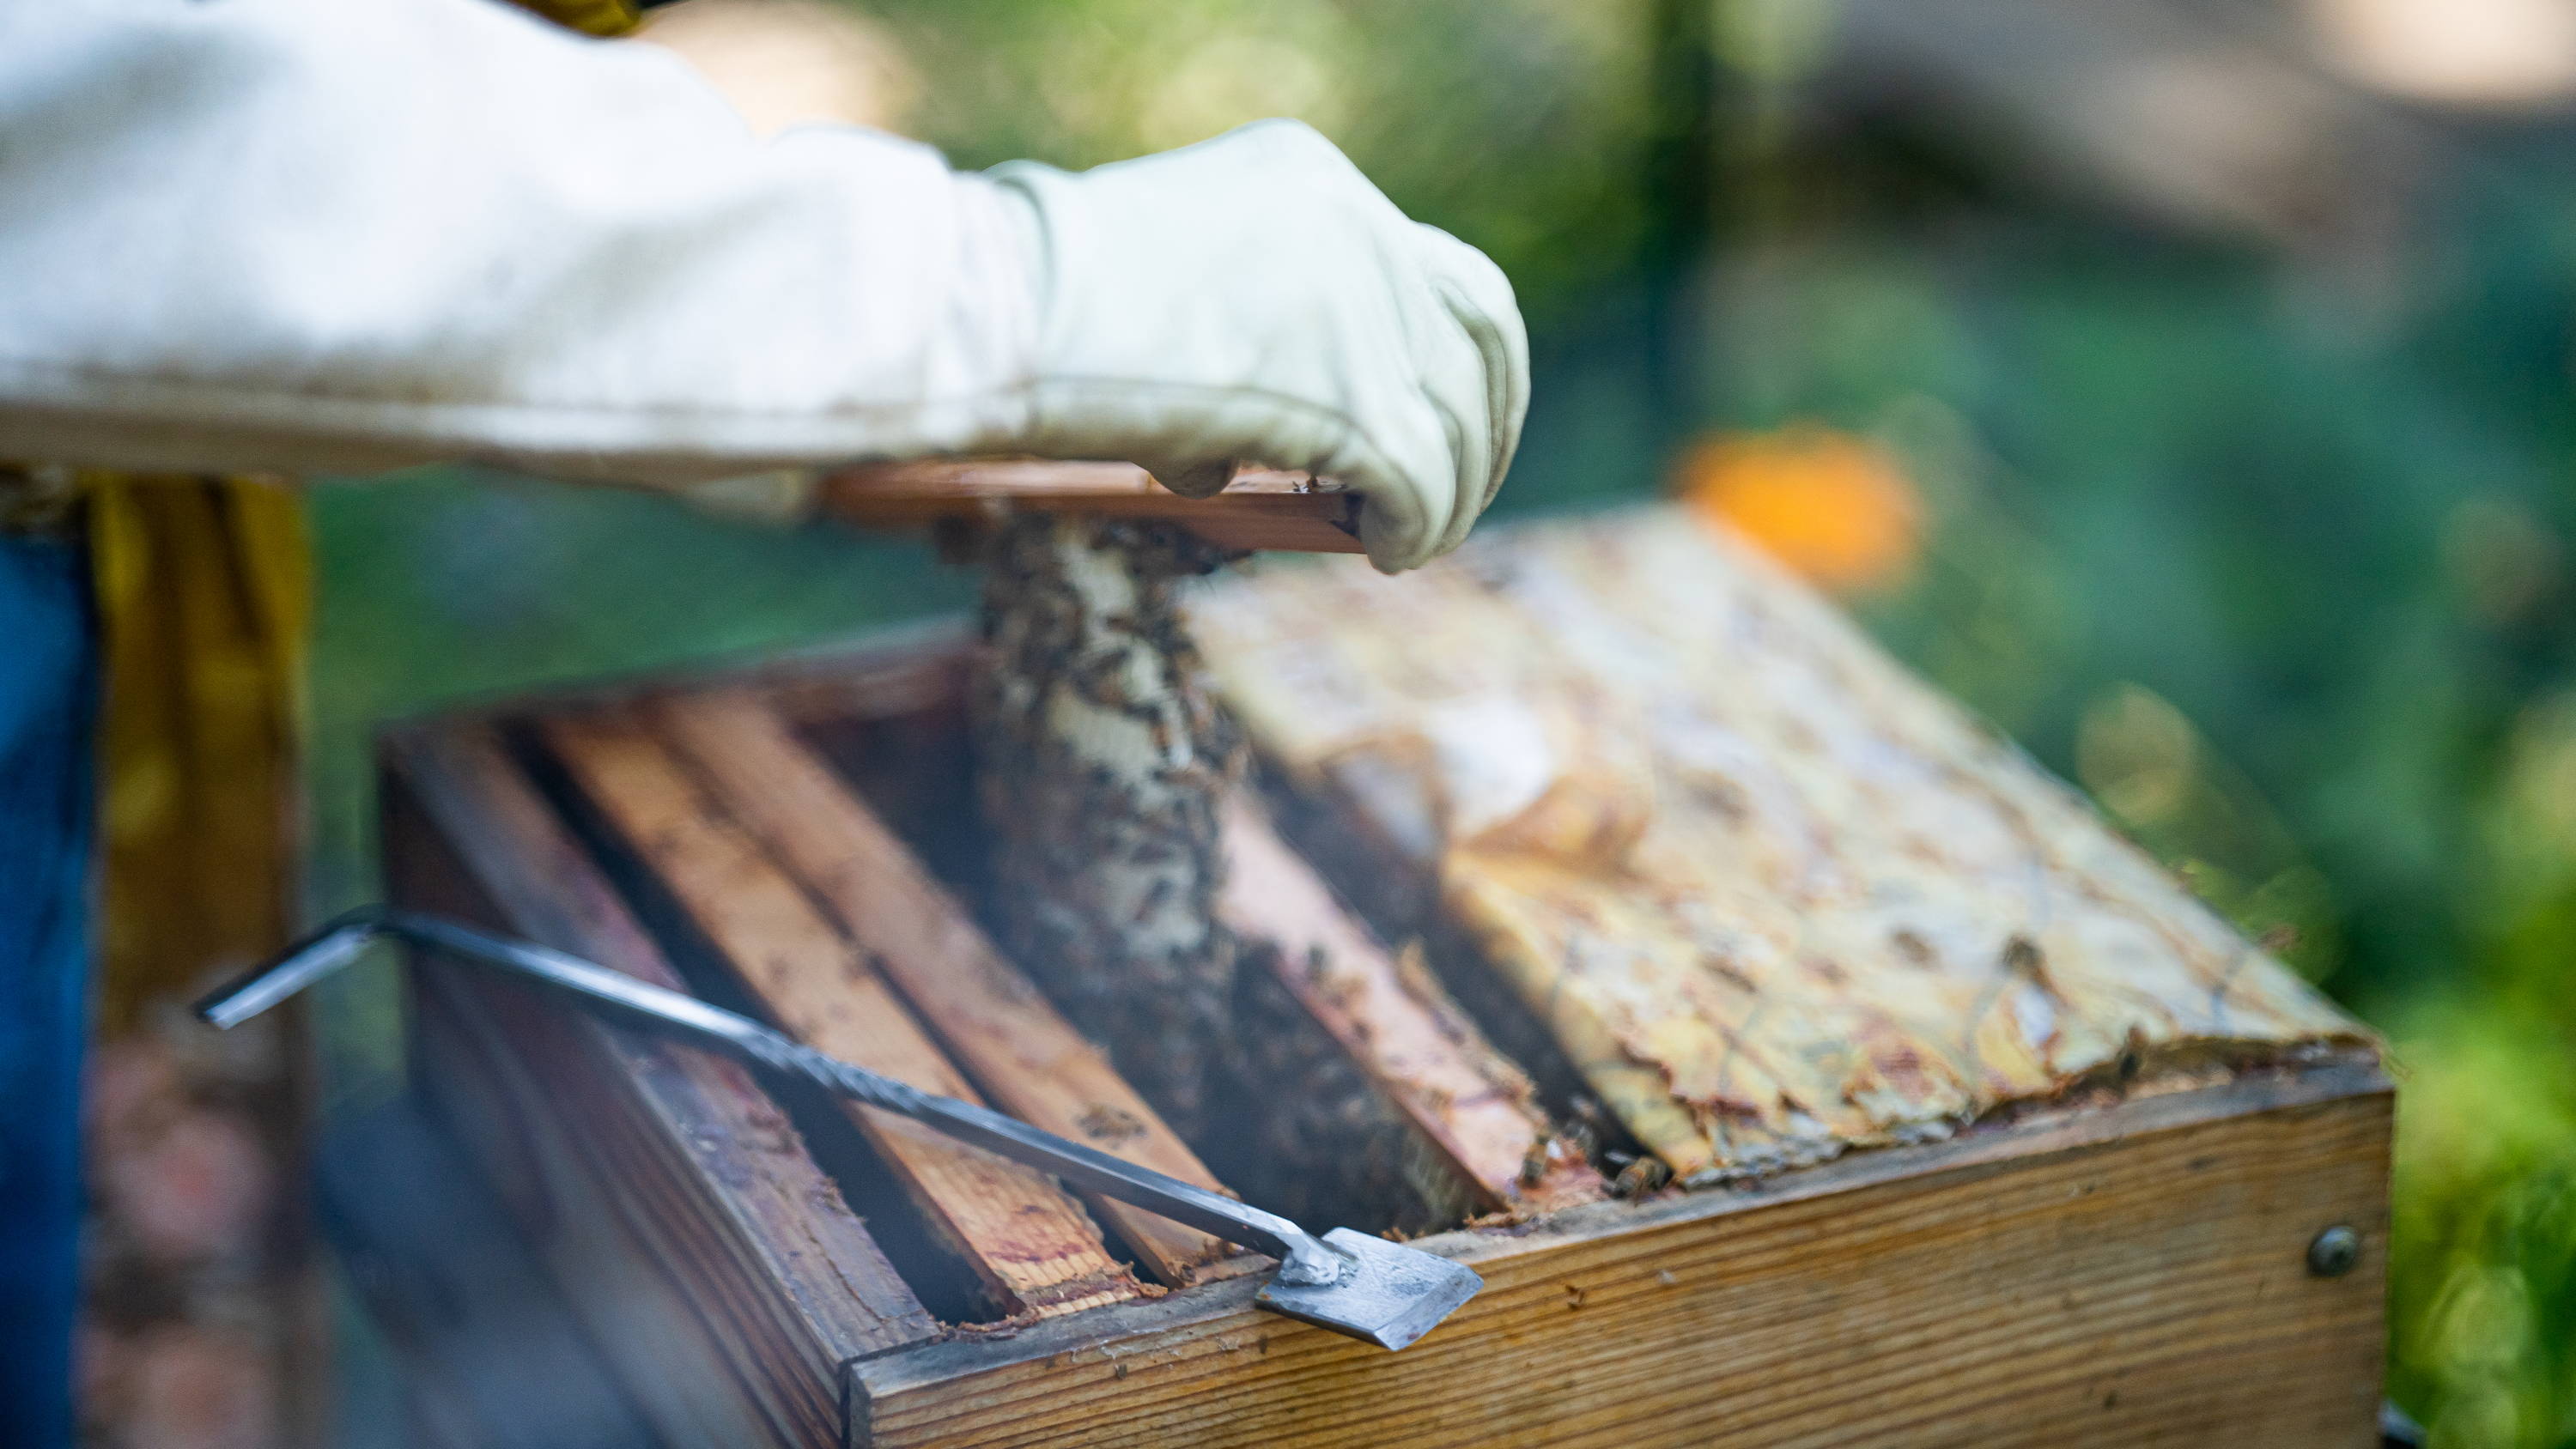 Beekeeper pulling a honeycomb from a warre style hive. A hive tool is the focal point.